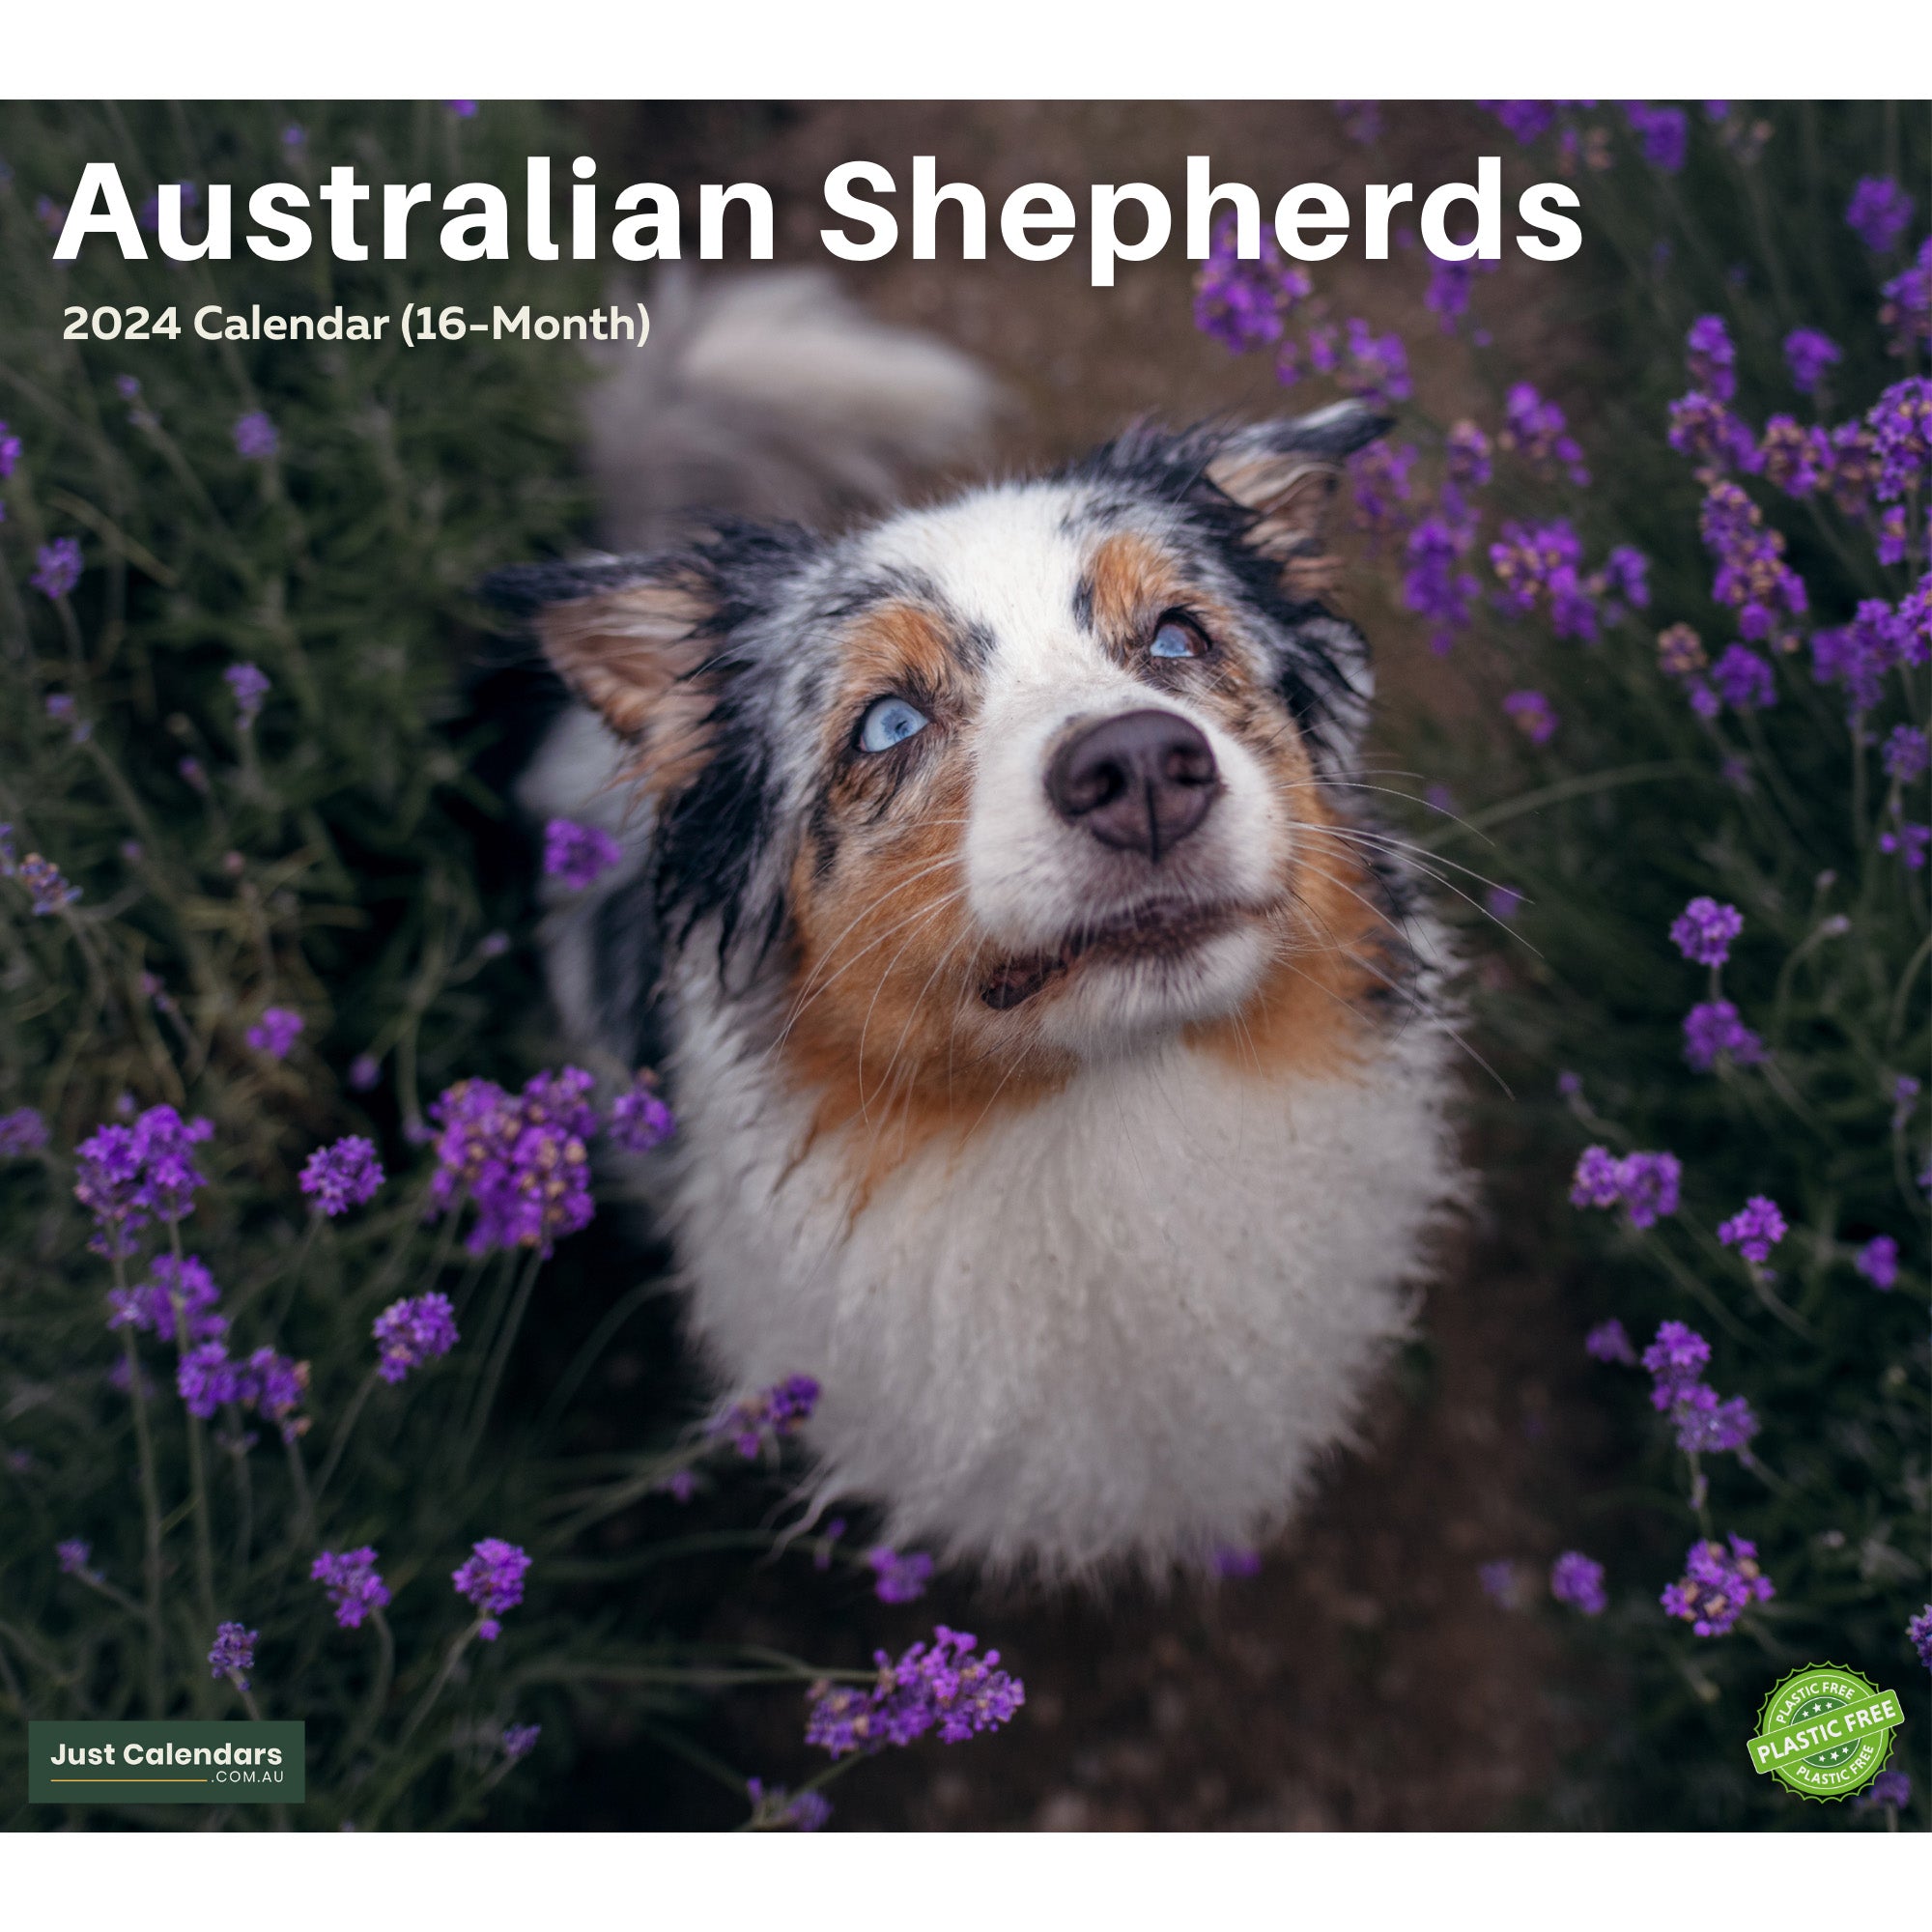 2024 Australian Shepherds Dogs & Puppies - Deluxe Wall Calendar by Just Calendars - 16 Month - Plastic Free